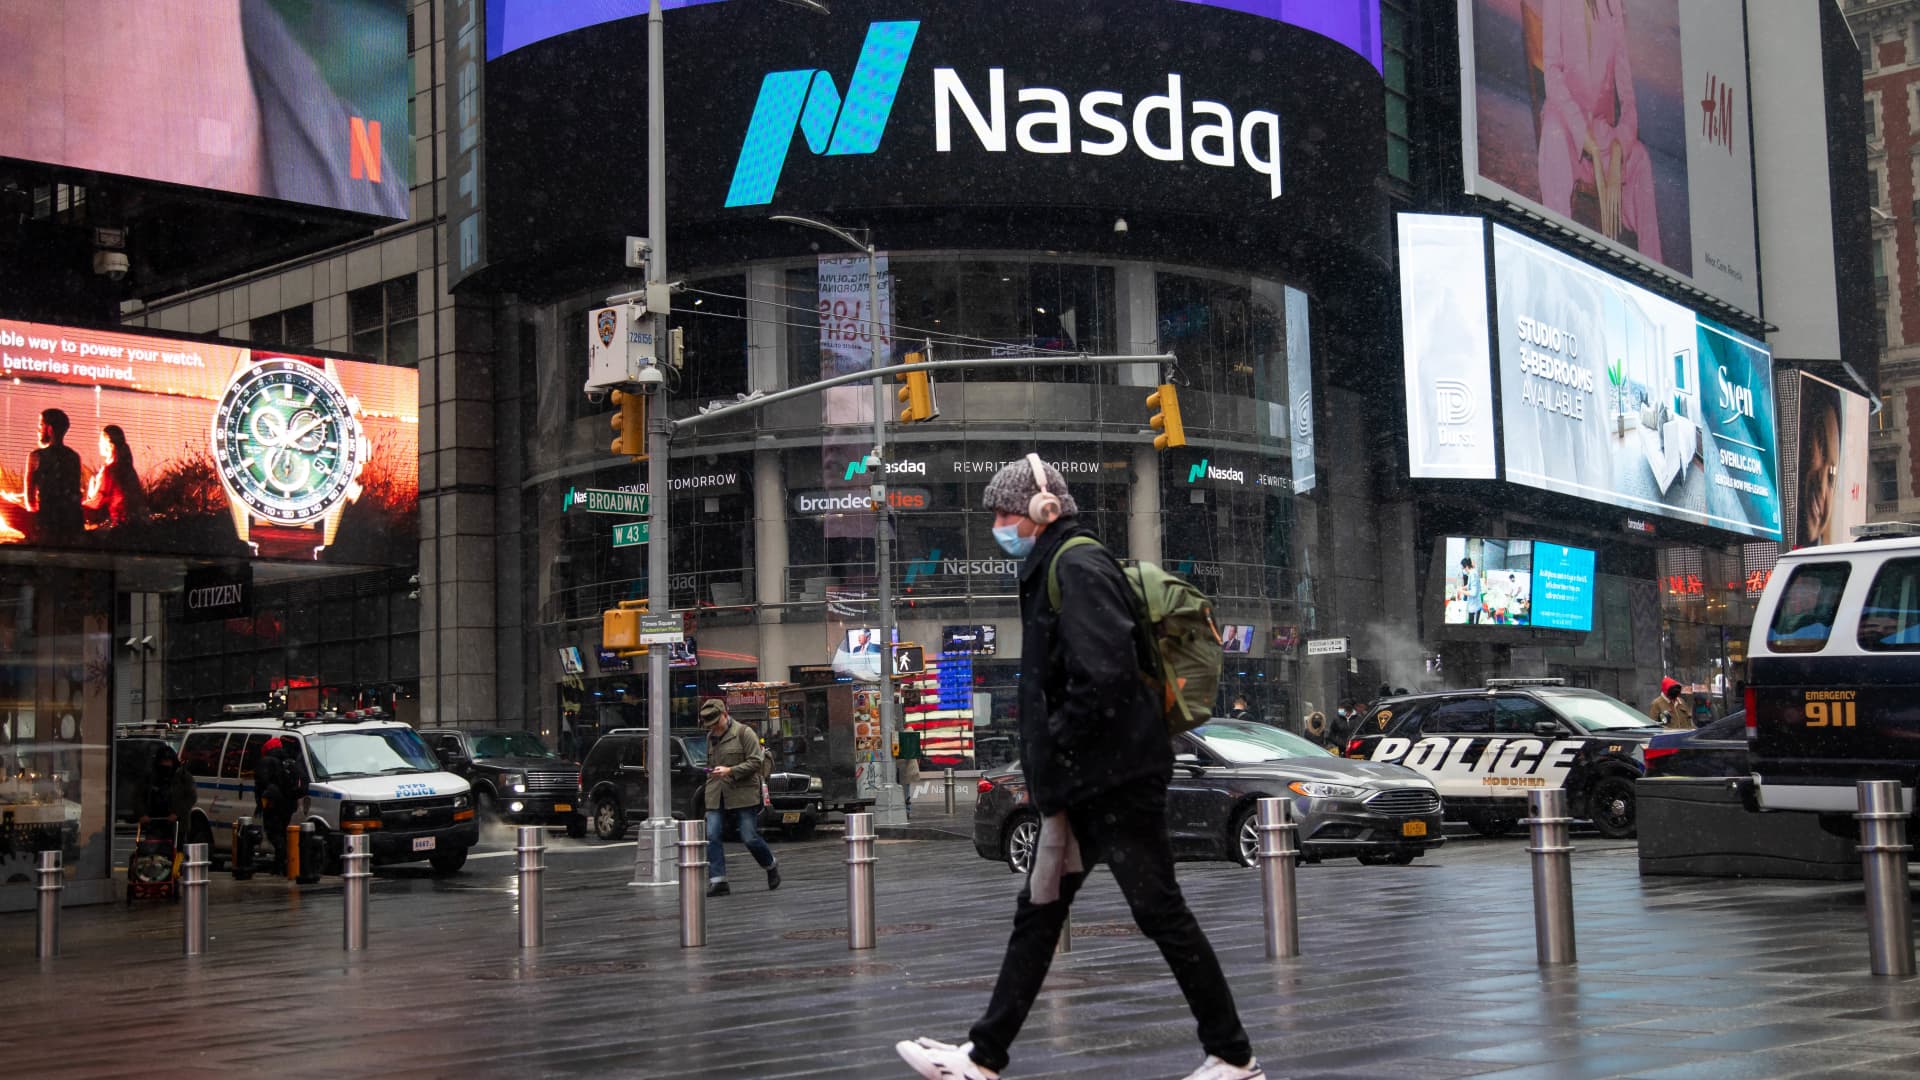 Analysts expect these Nasdaq stocks to rally in 2023, with some forecast to double